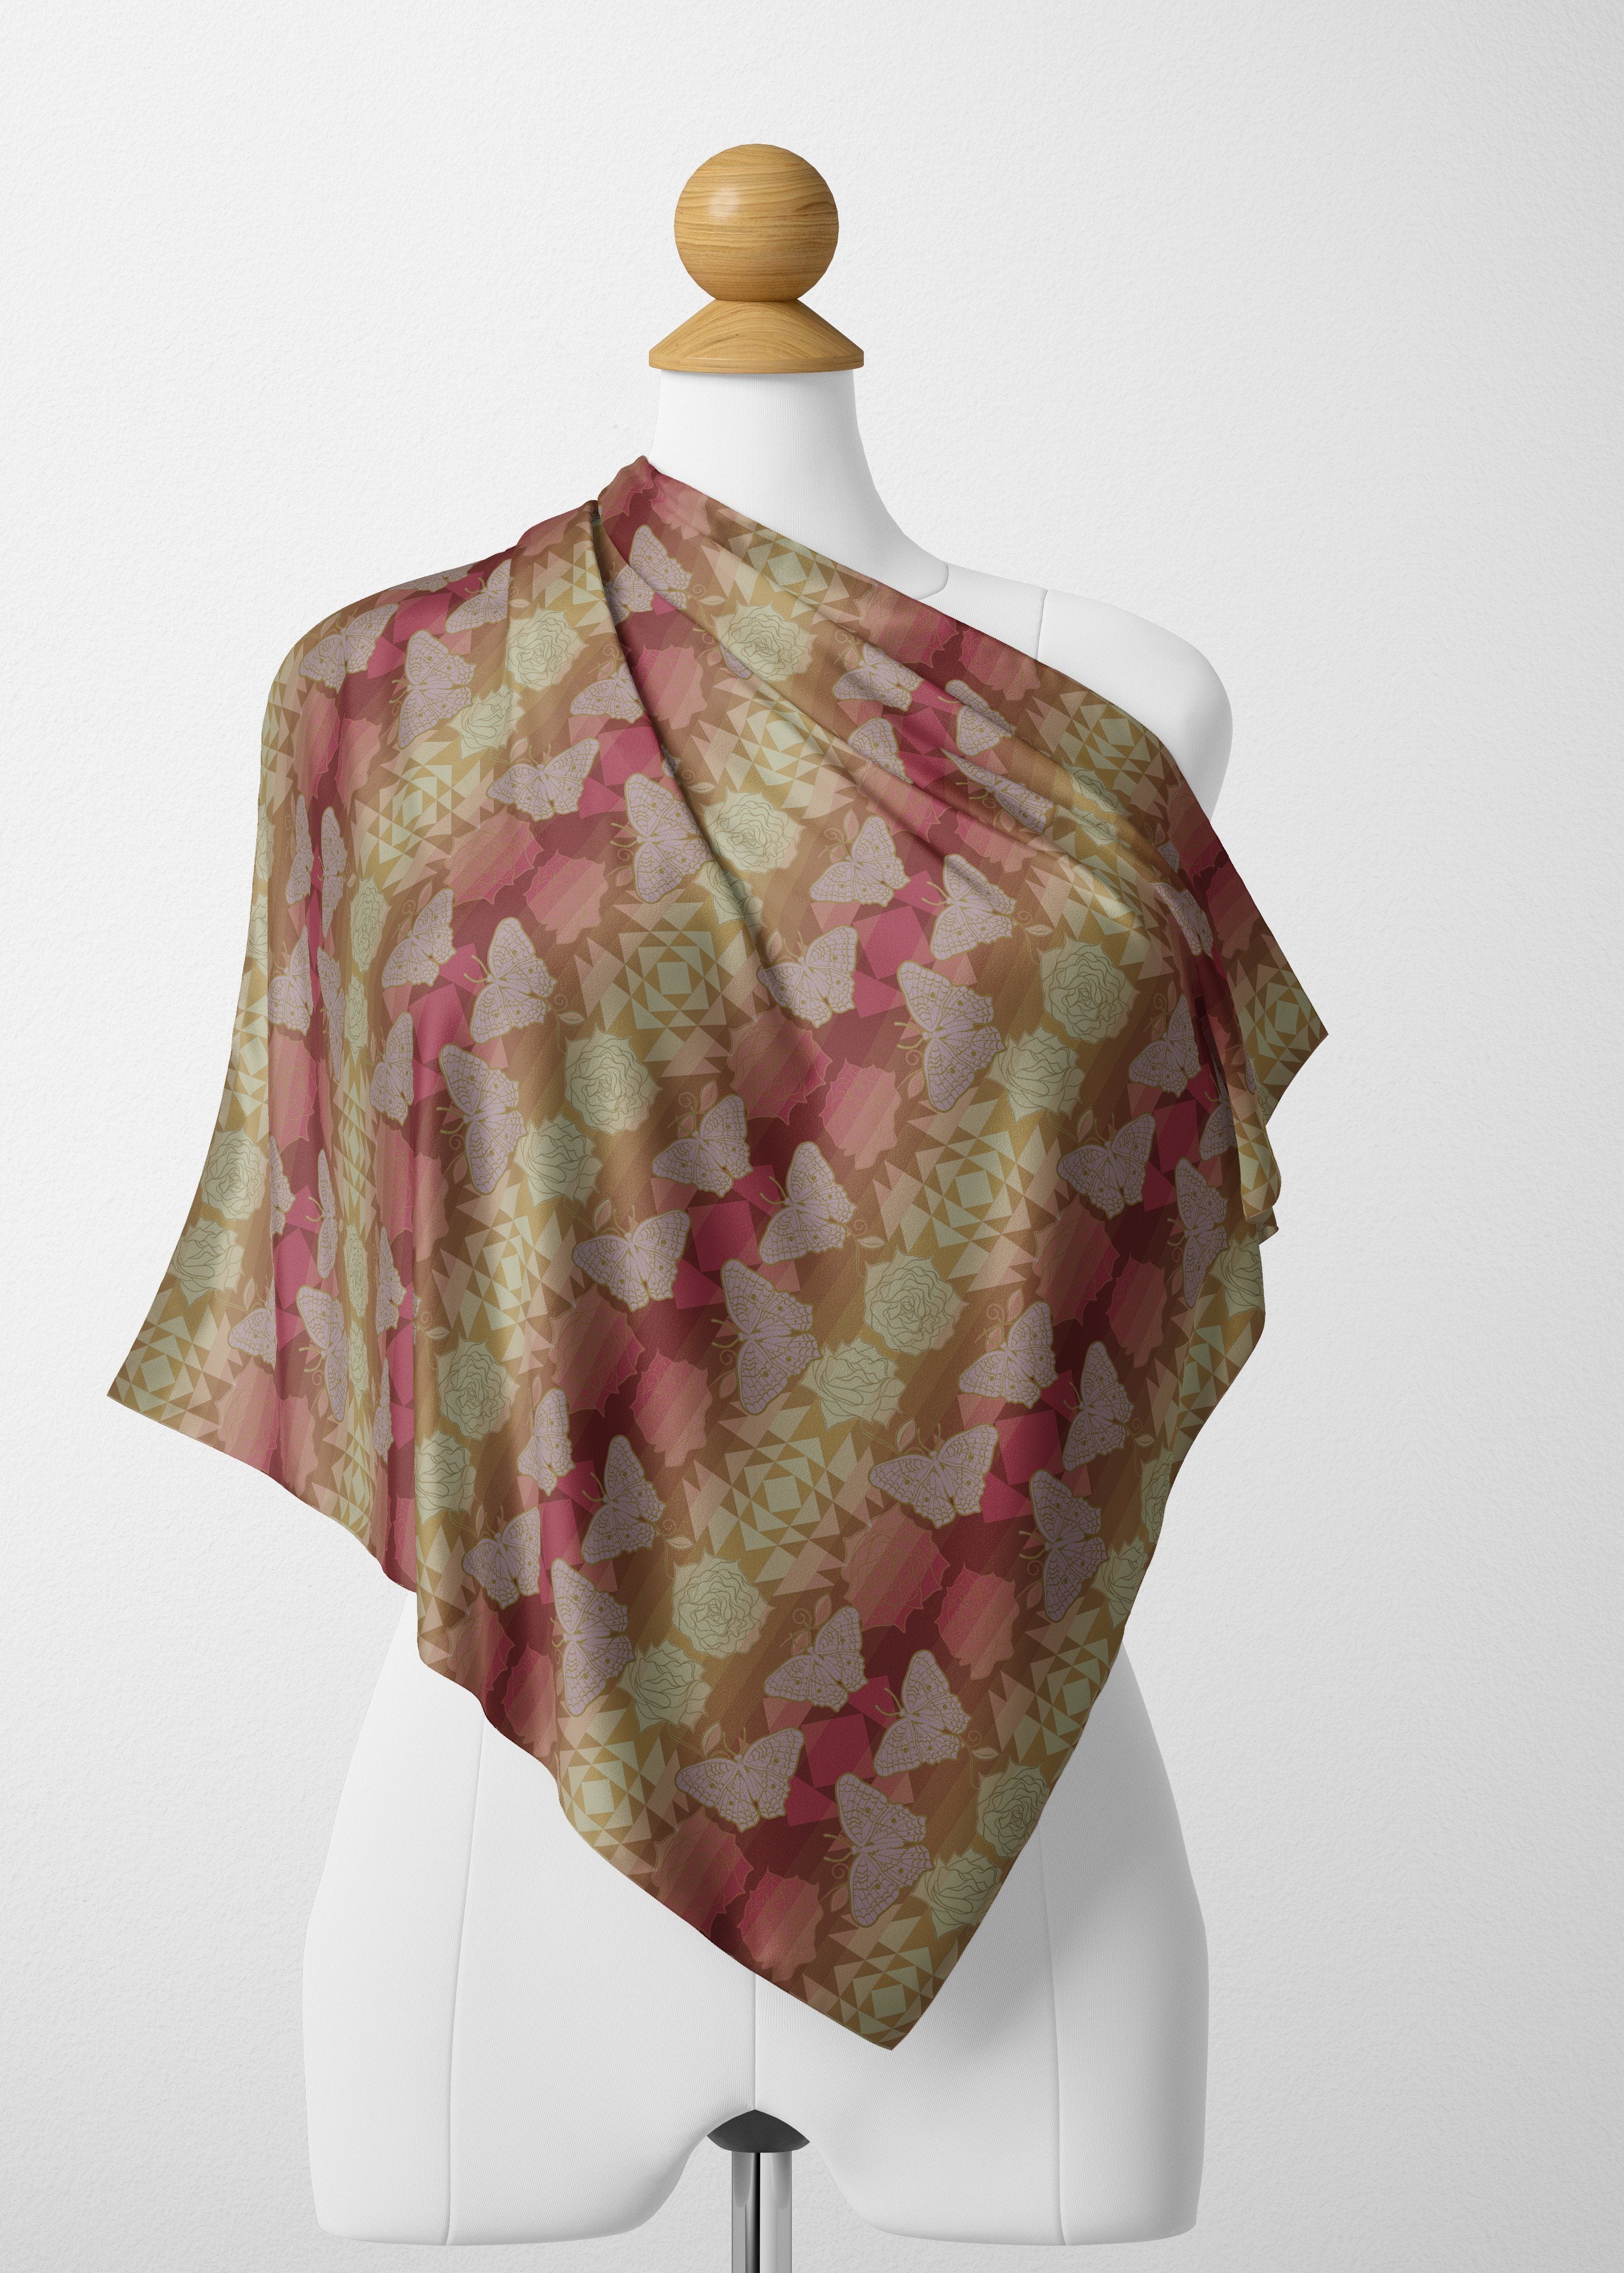 Butterfly and Roses on Geometric Satin Shawl Scarf 49 Dzine 